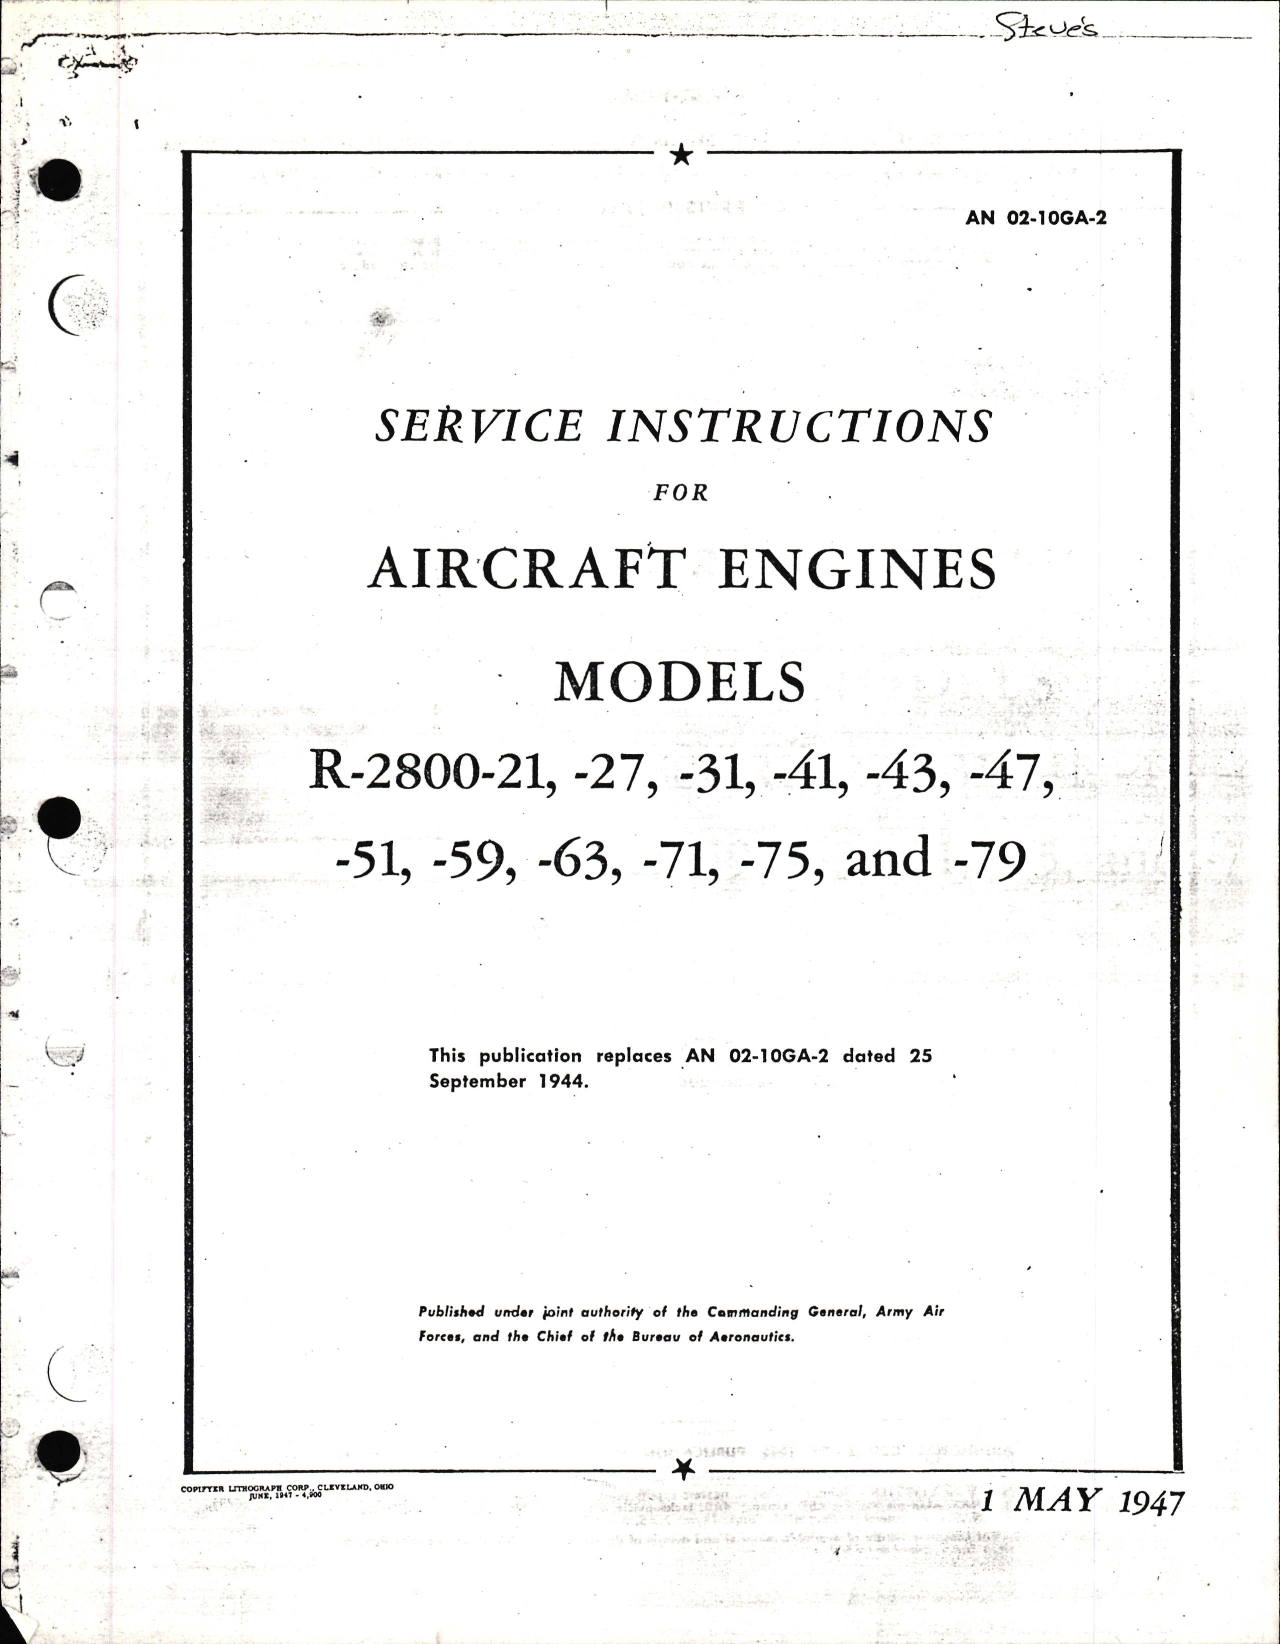 Sample page 1 from AirCorps Library document: Service Instructions for R-2800-21, -27, -31, -41, -43, -47, -51, -59, -63, -71, -75, and -79